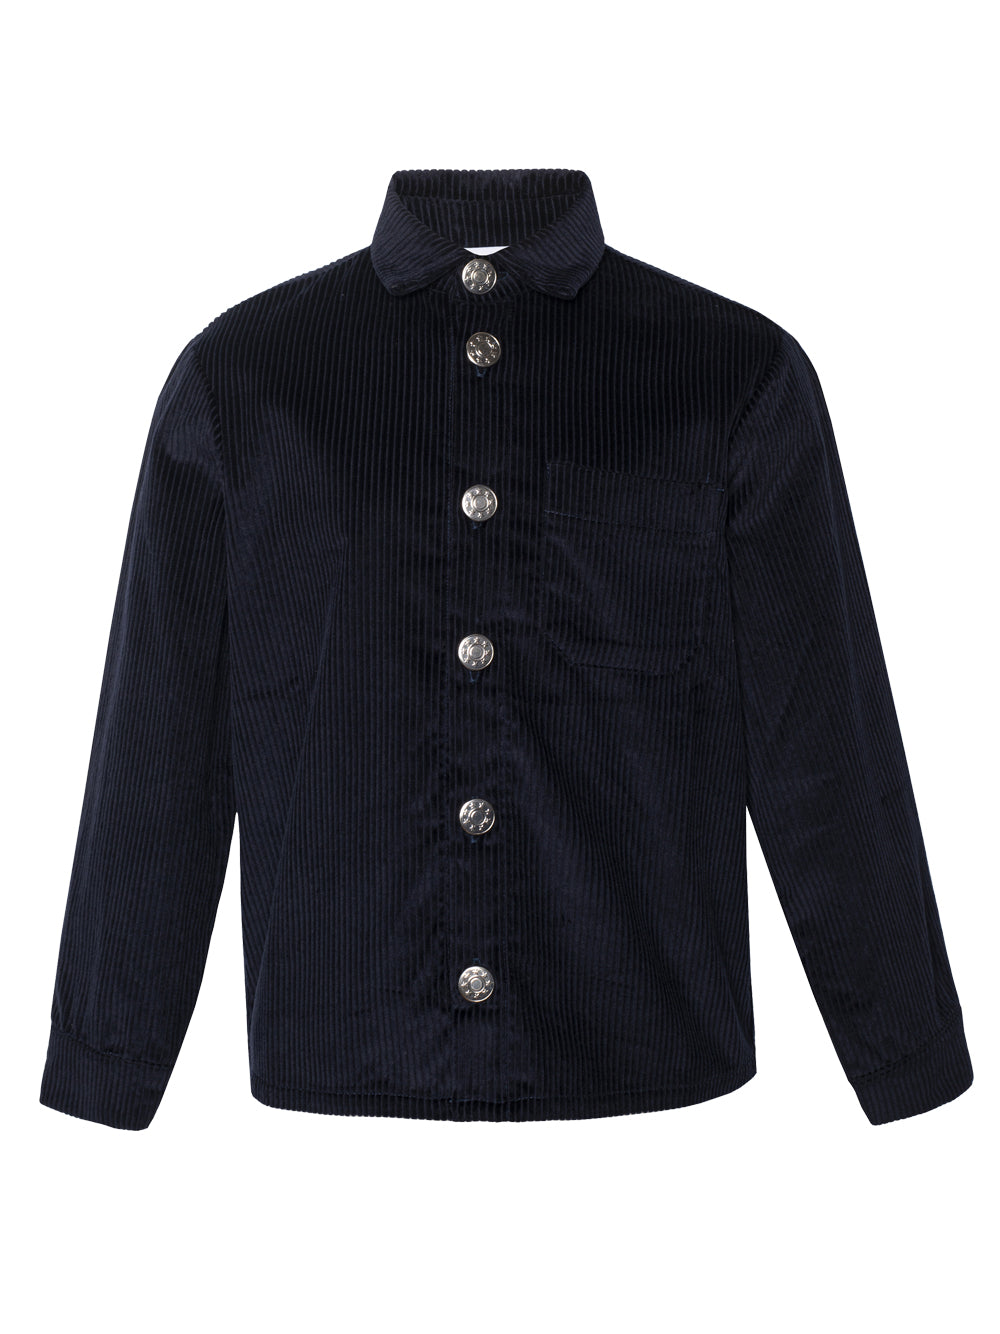 Shop Amsterdam Corduroy Overshirt Paade Mode. Today you can shop for ...